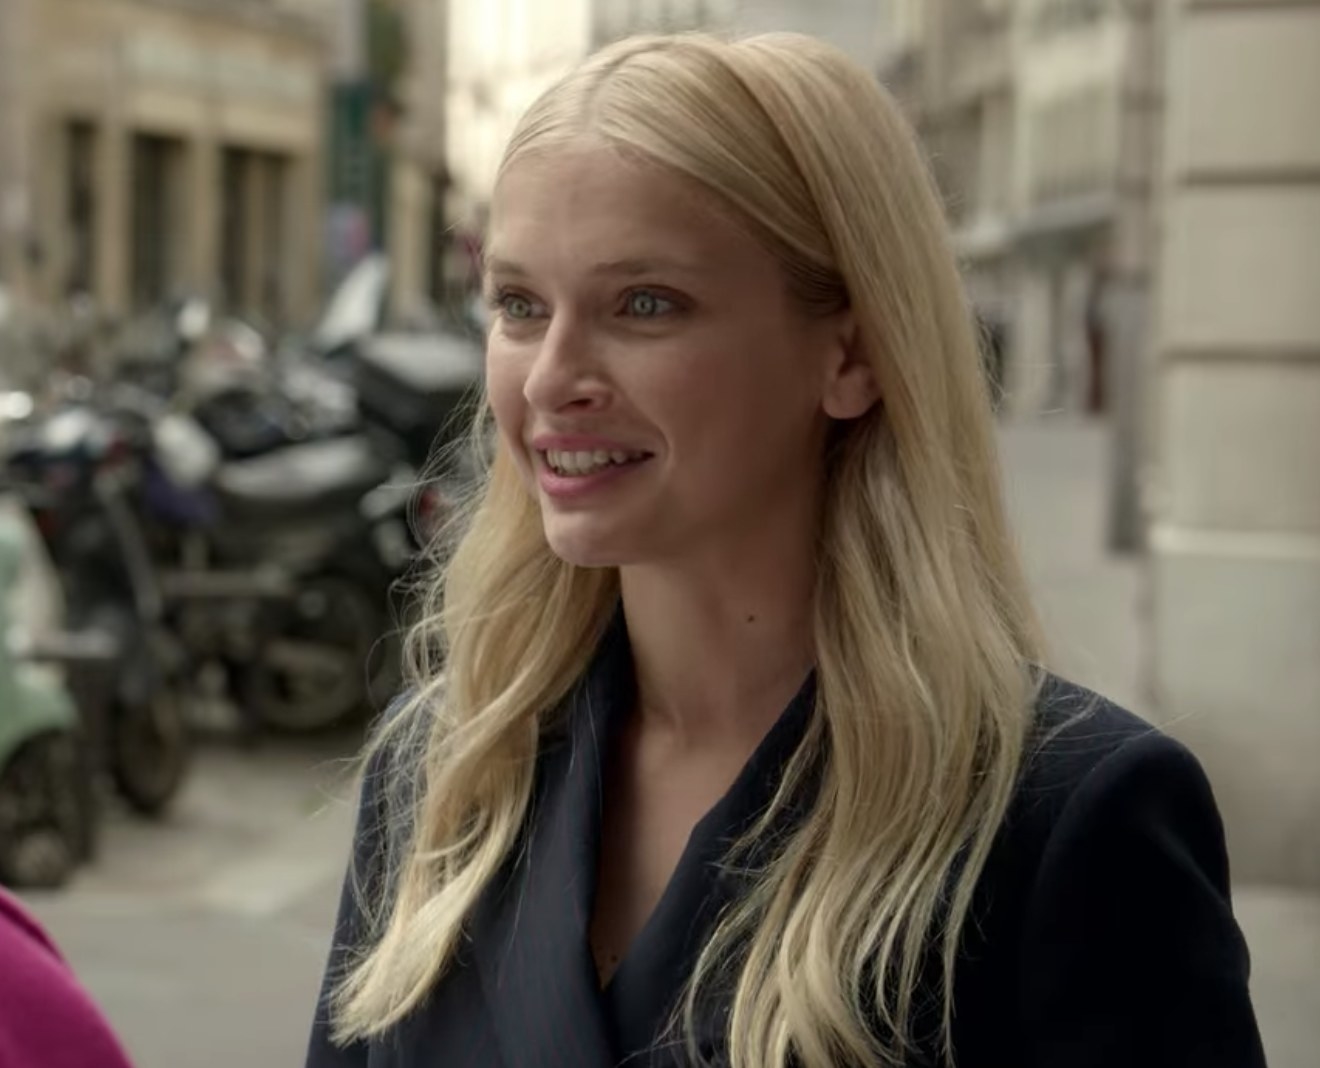 Emily in Paris' Camille Razat Teases What's Next for Character